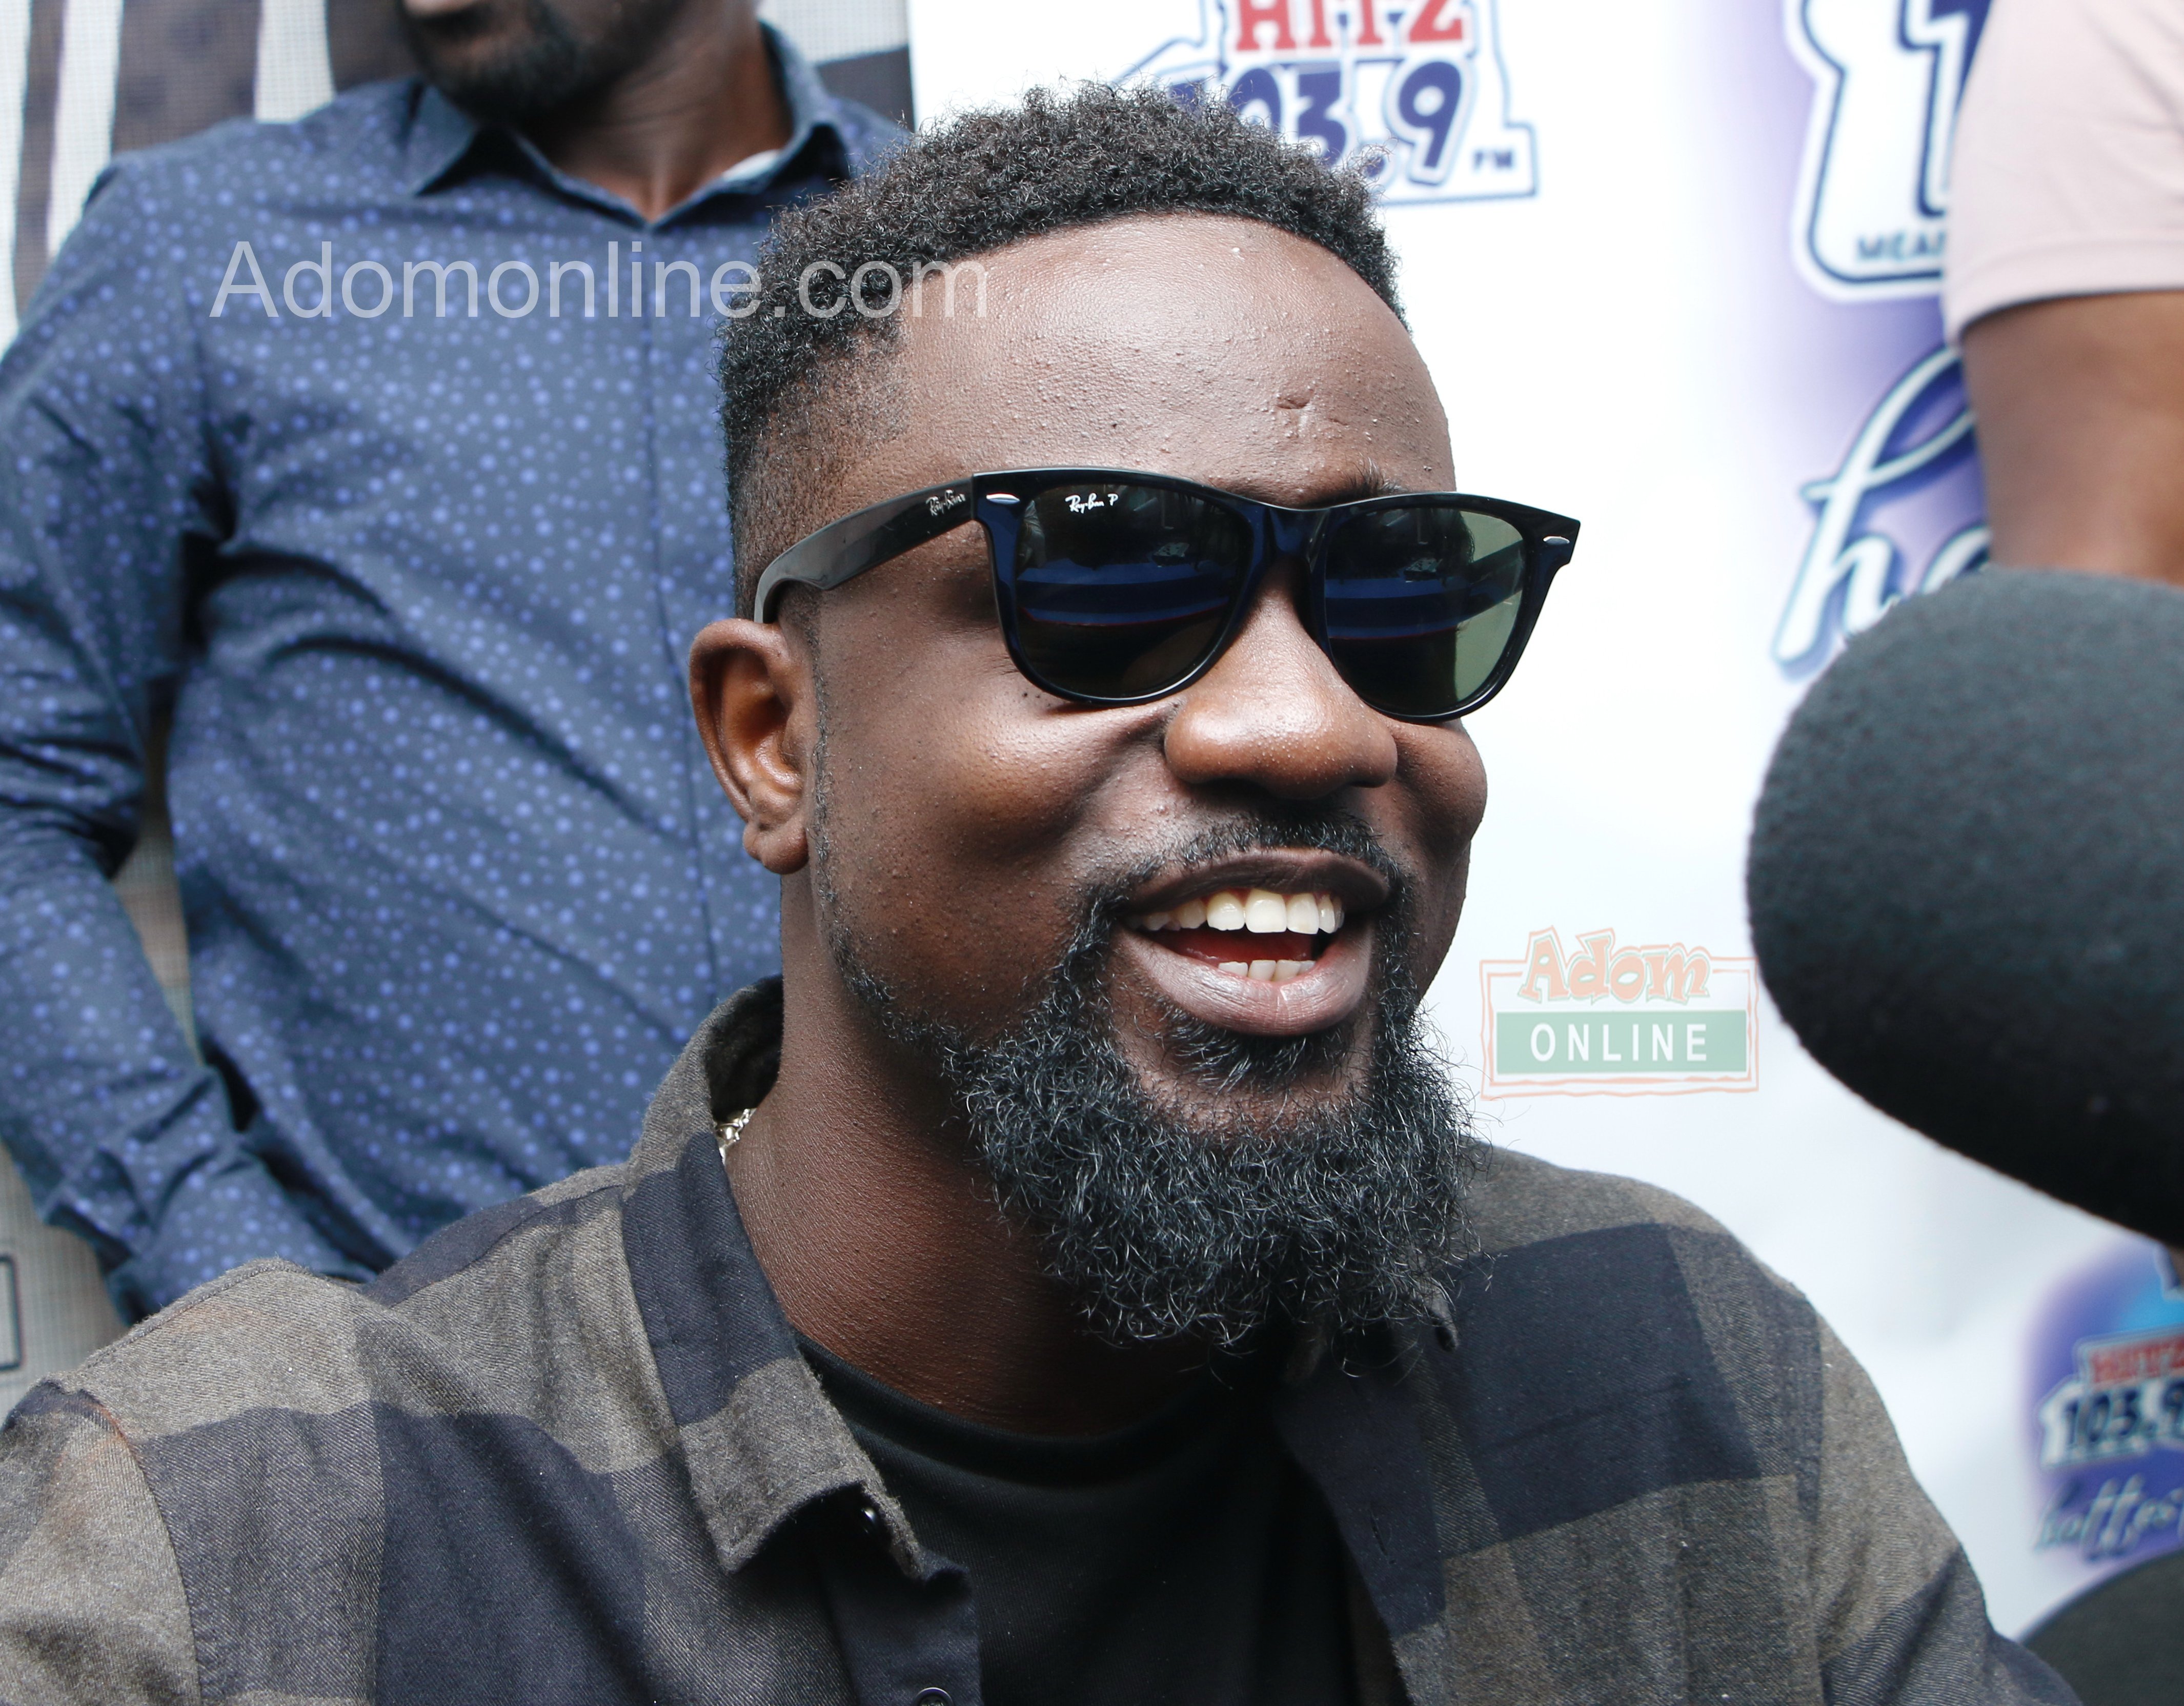 ”I Will Not Be Part Of Any Political Party” – Sarkodie